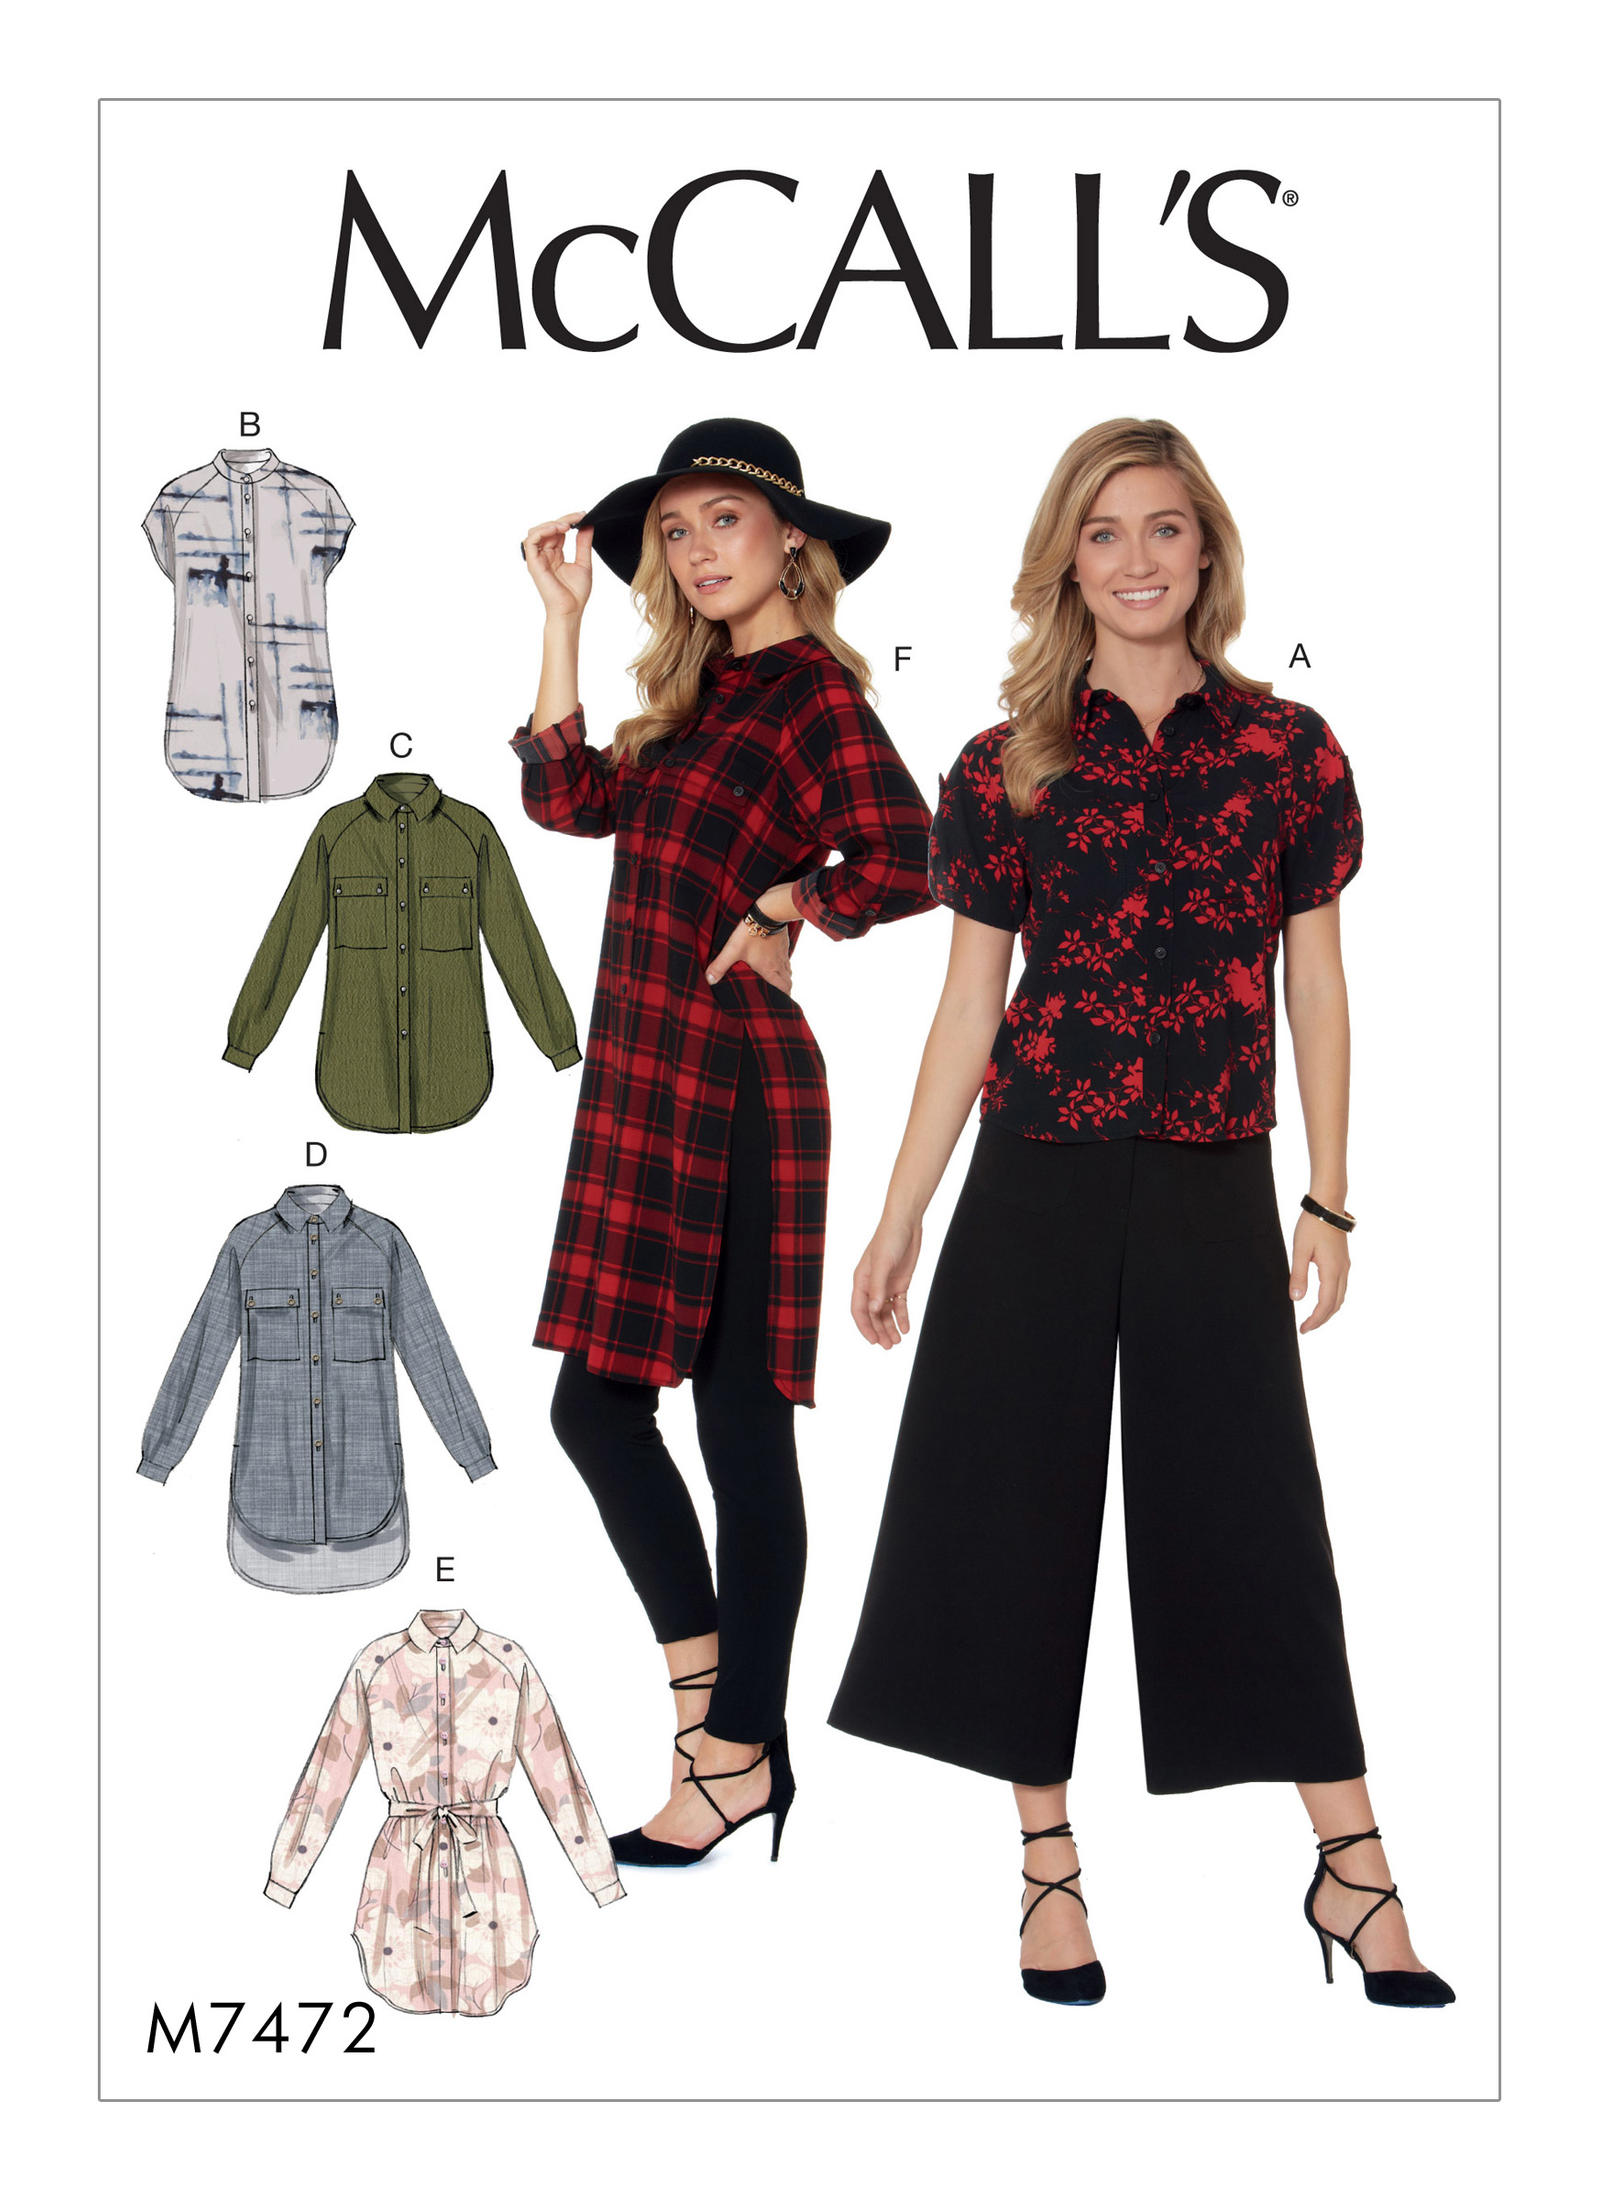 McCall's 7472 Misses' Raglan Sleeve, Button-Down Shirts and Tunics